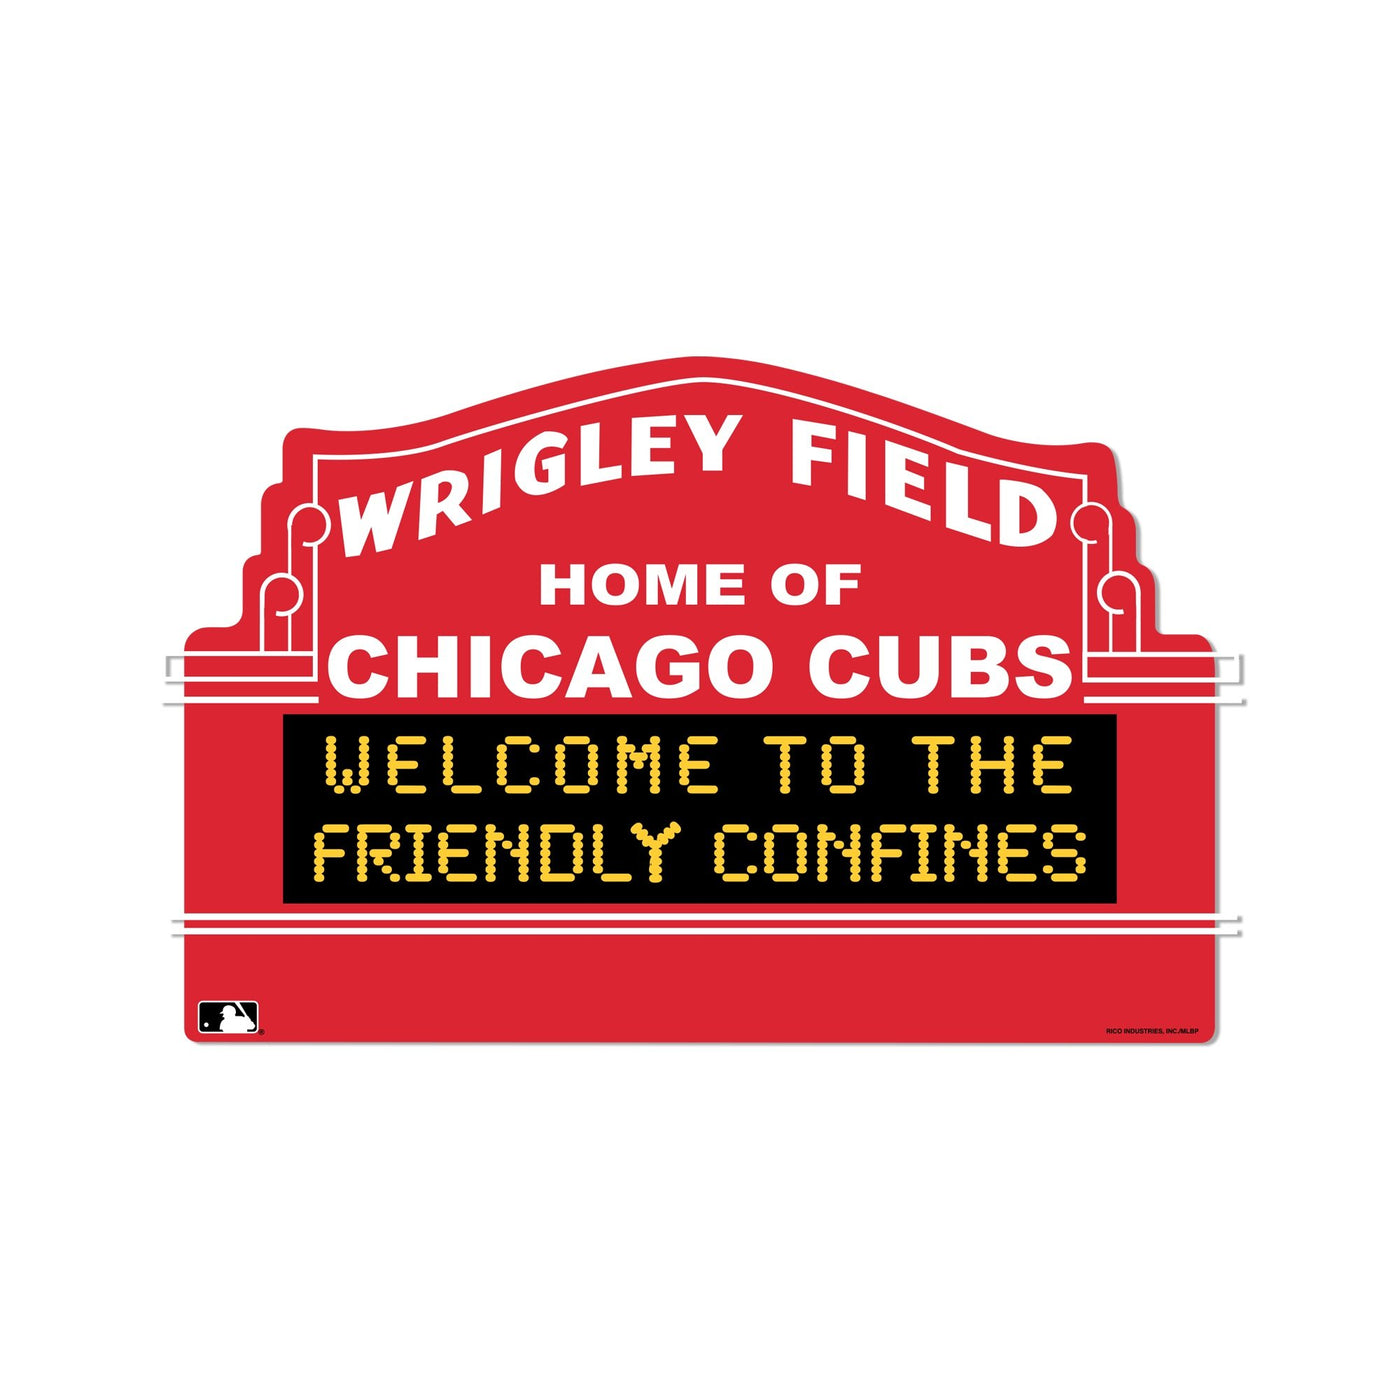 WRIGLEY FIELD MARQUEE SIGN - Ivy Shop